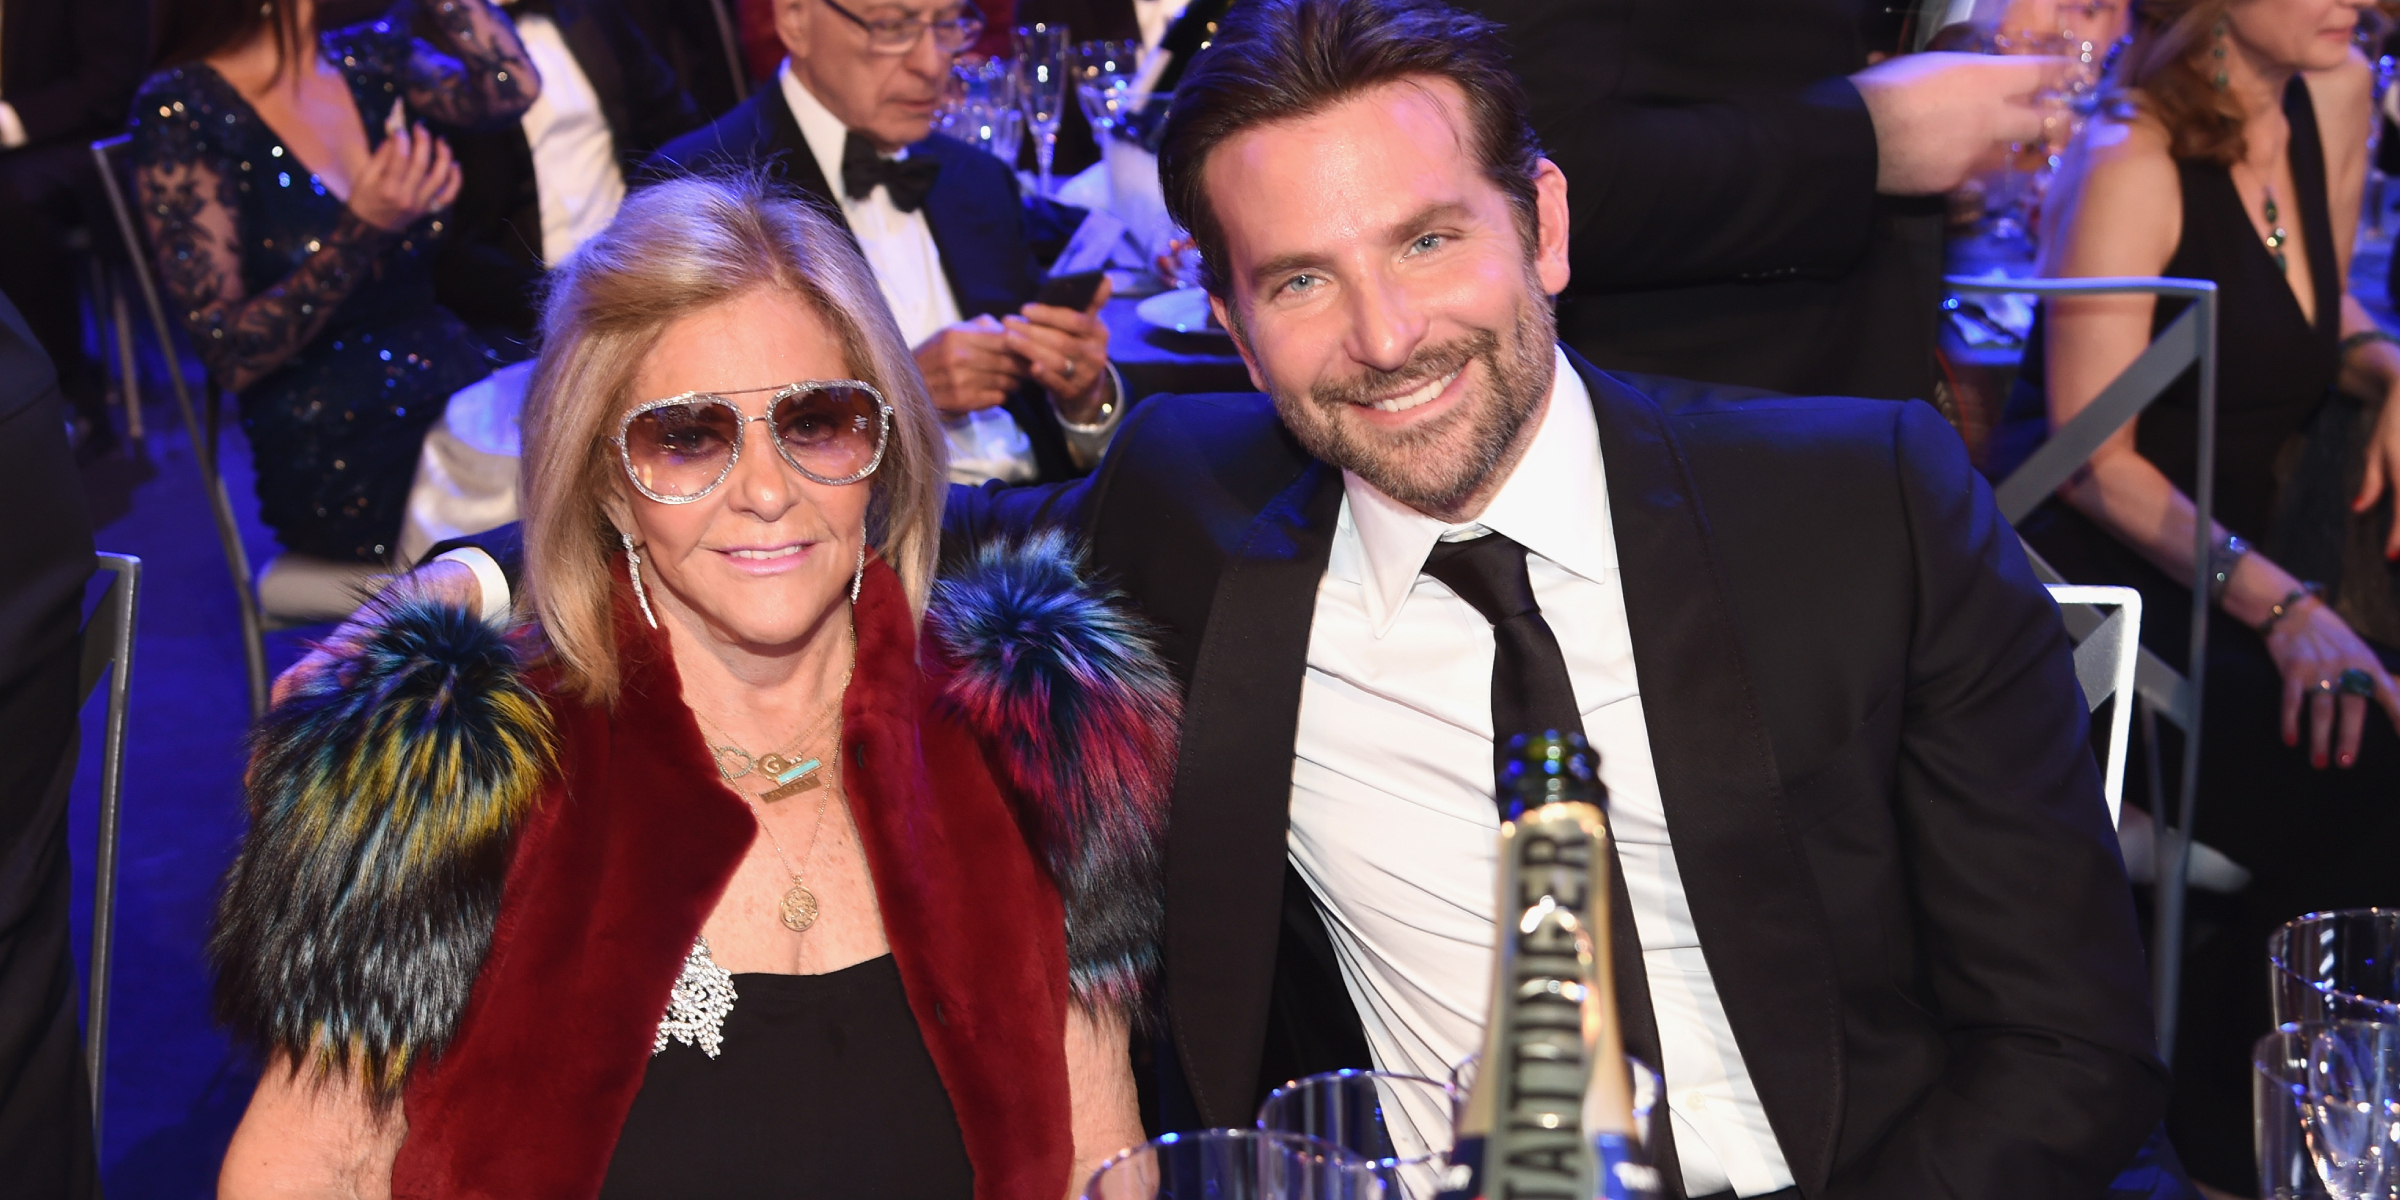 Gloria Cooper and Bradley Cooper | Source: Getty Images